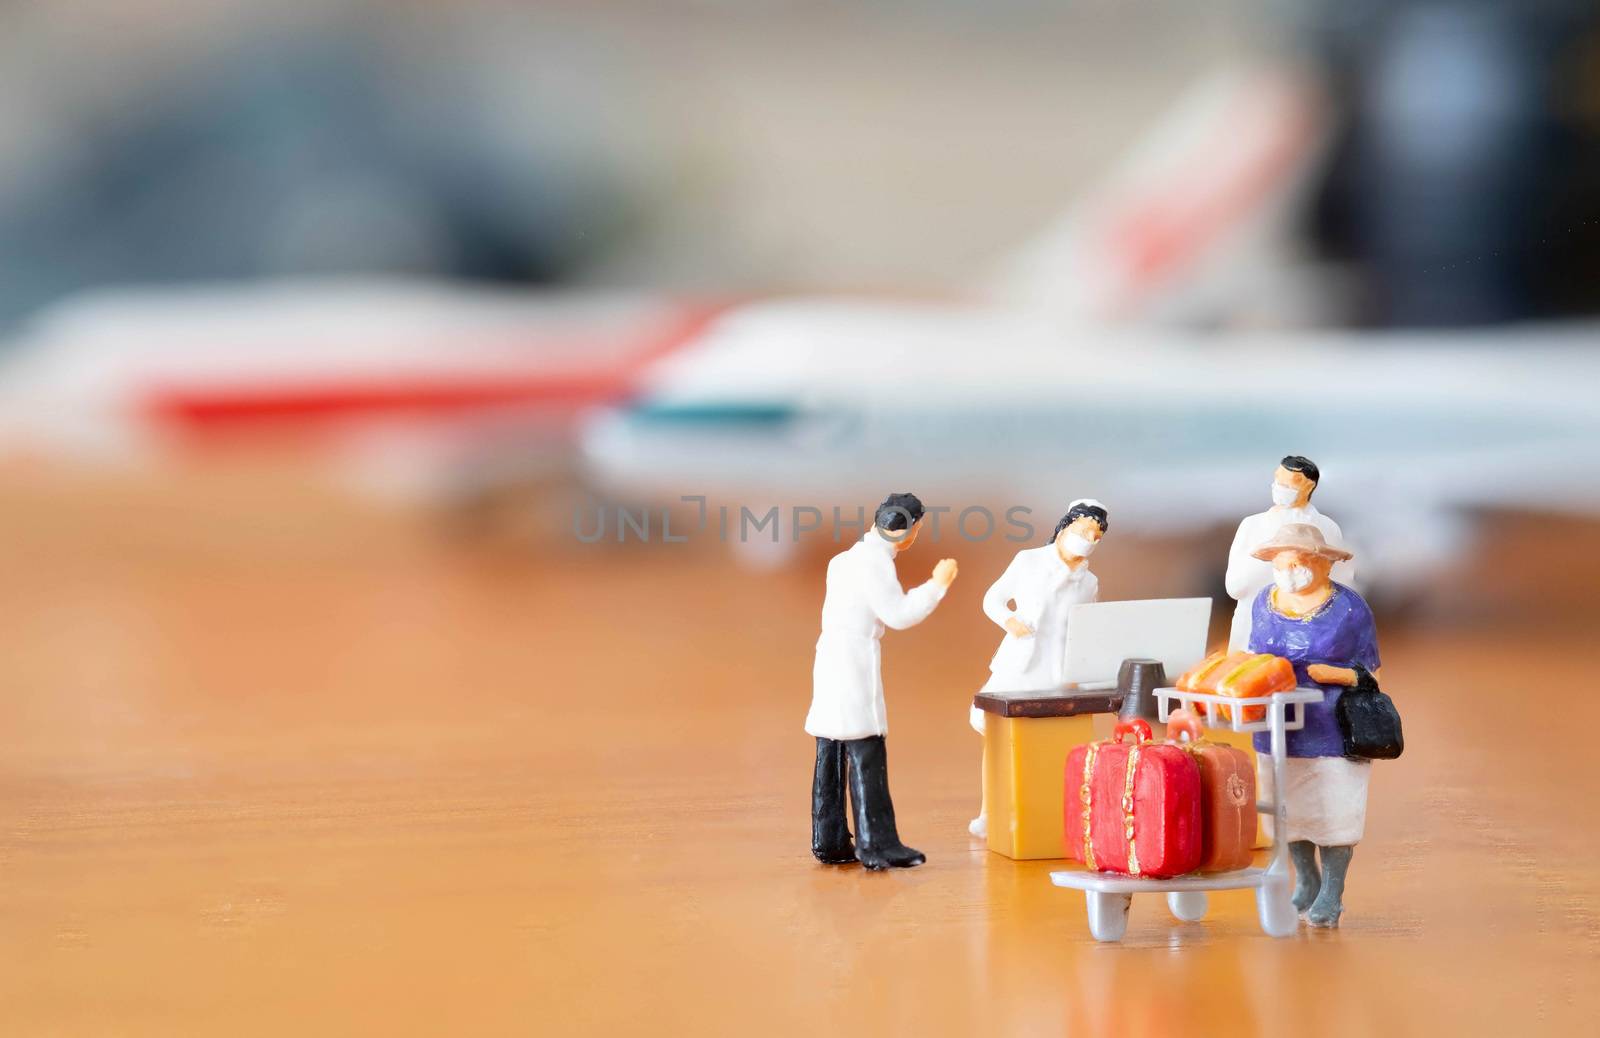 miniature figure doll passenger in airport wearing mask to prote by Bonn2210